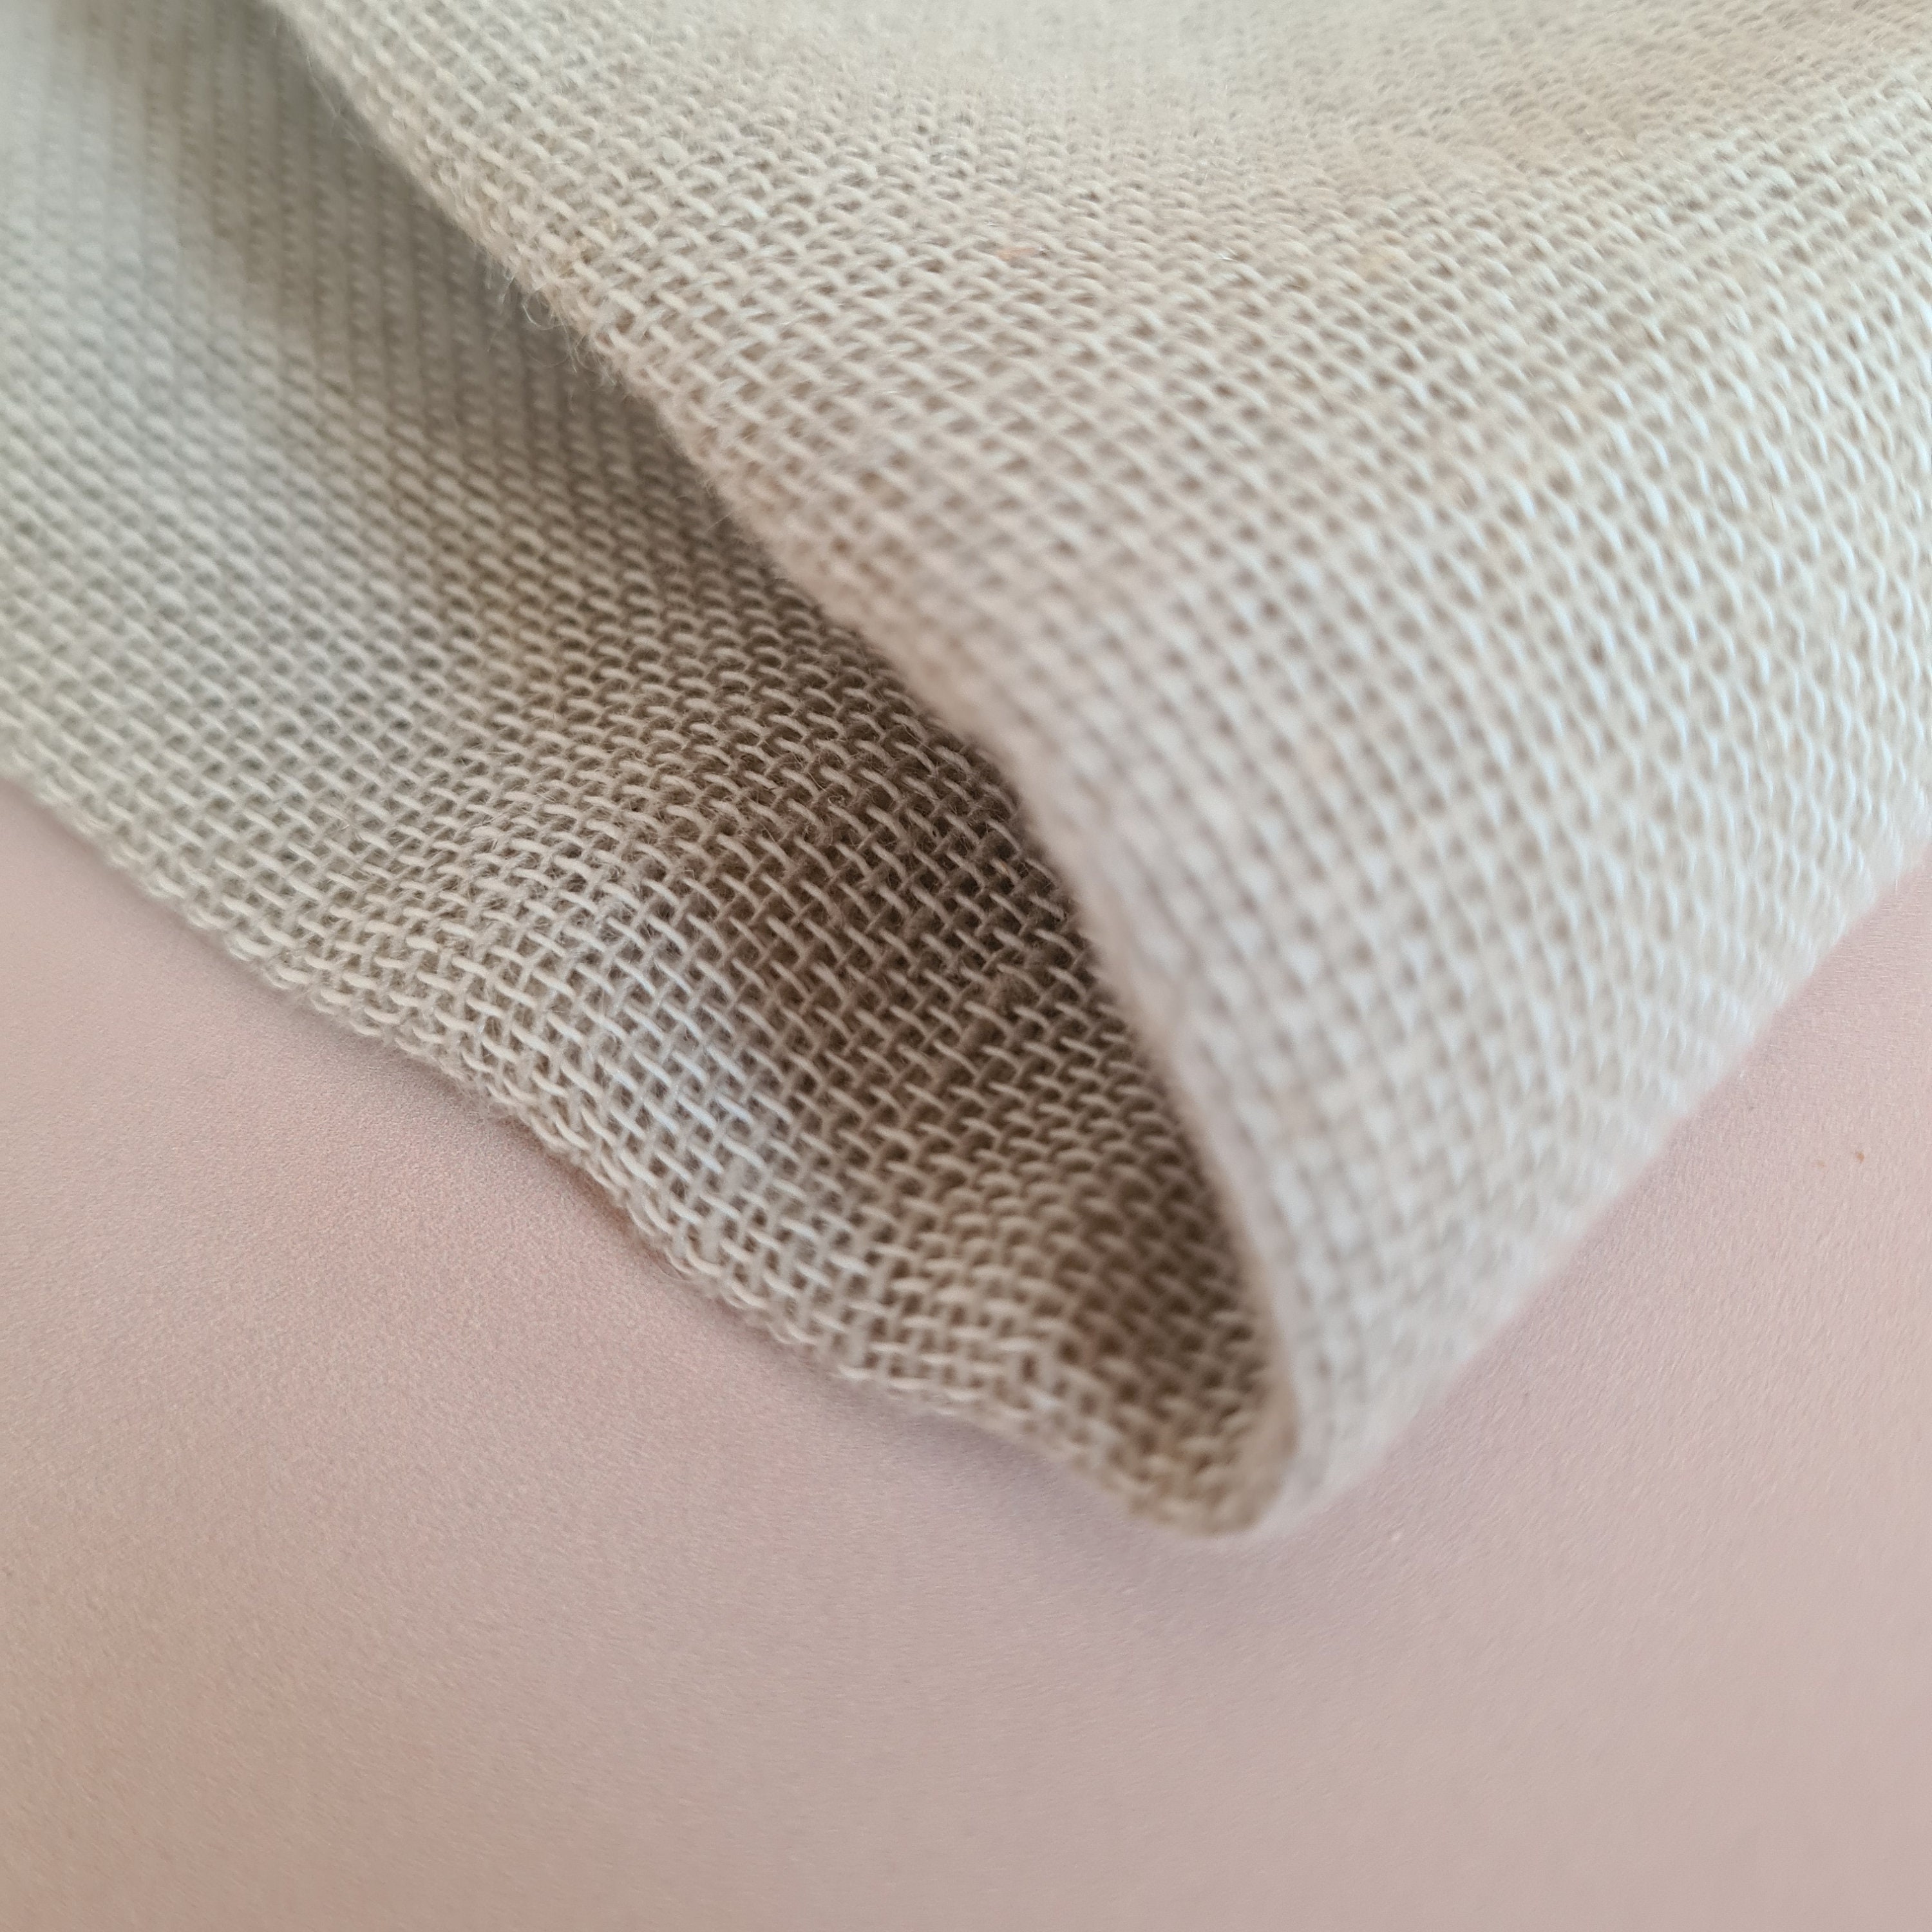 Linen Fabric for Punch Needle 1/2 Metre 